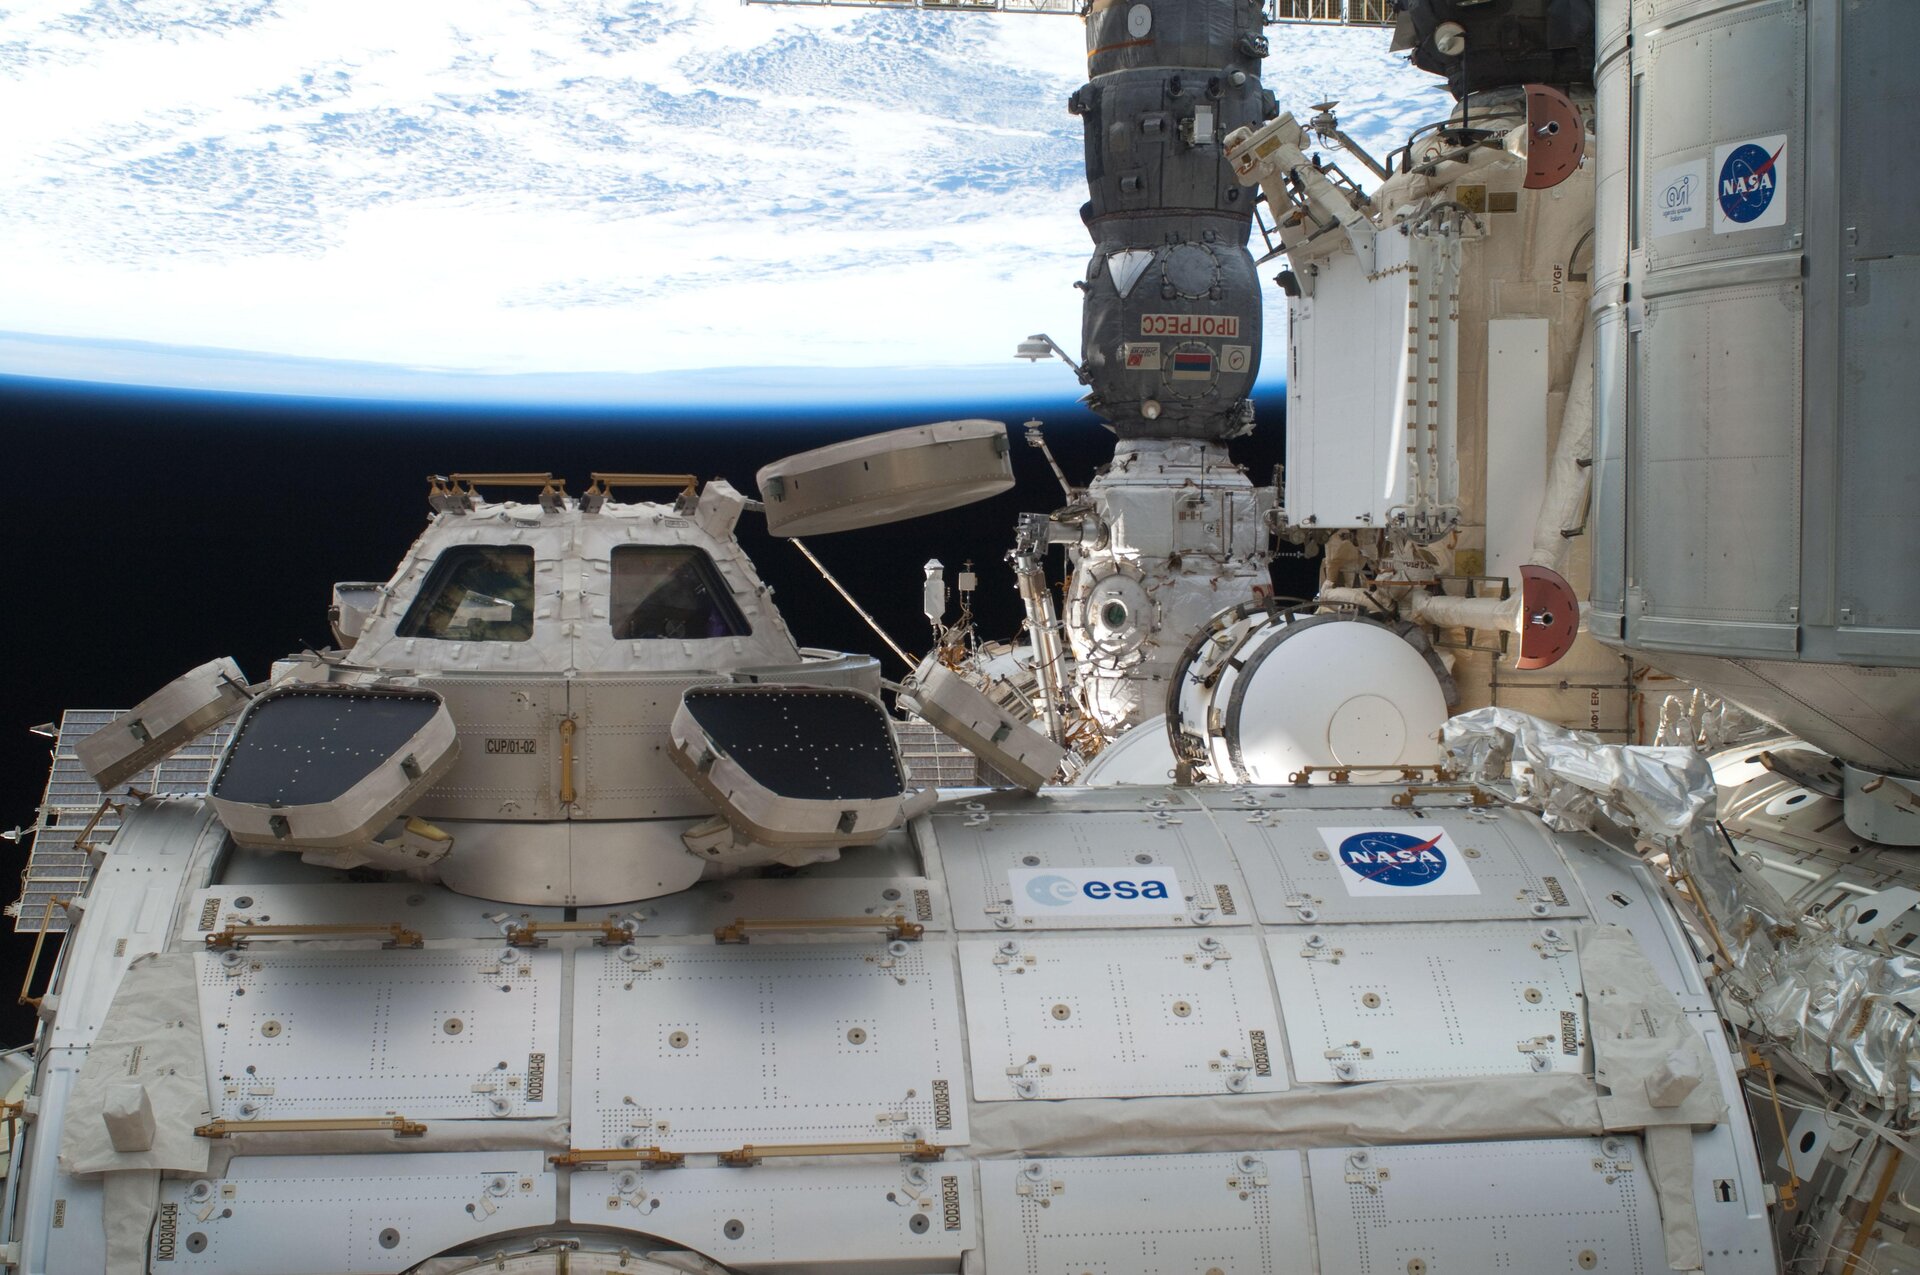 The European-built Cupola of the ISS